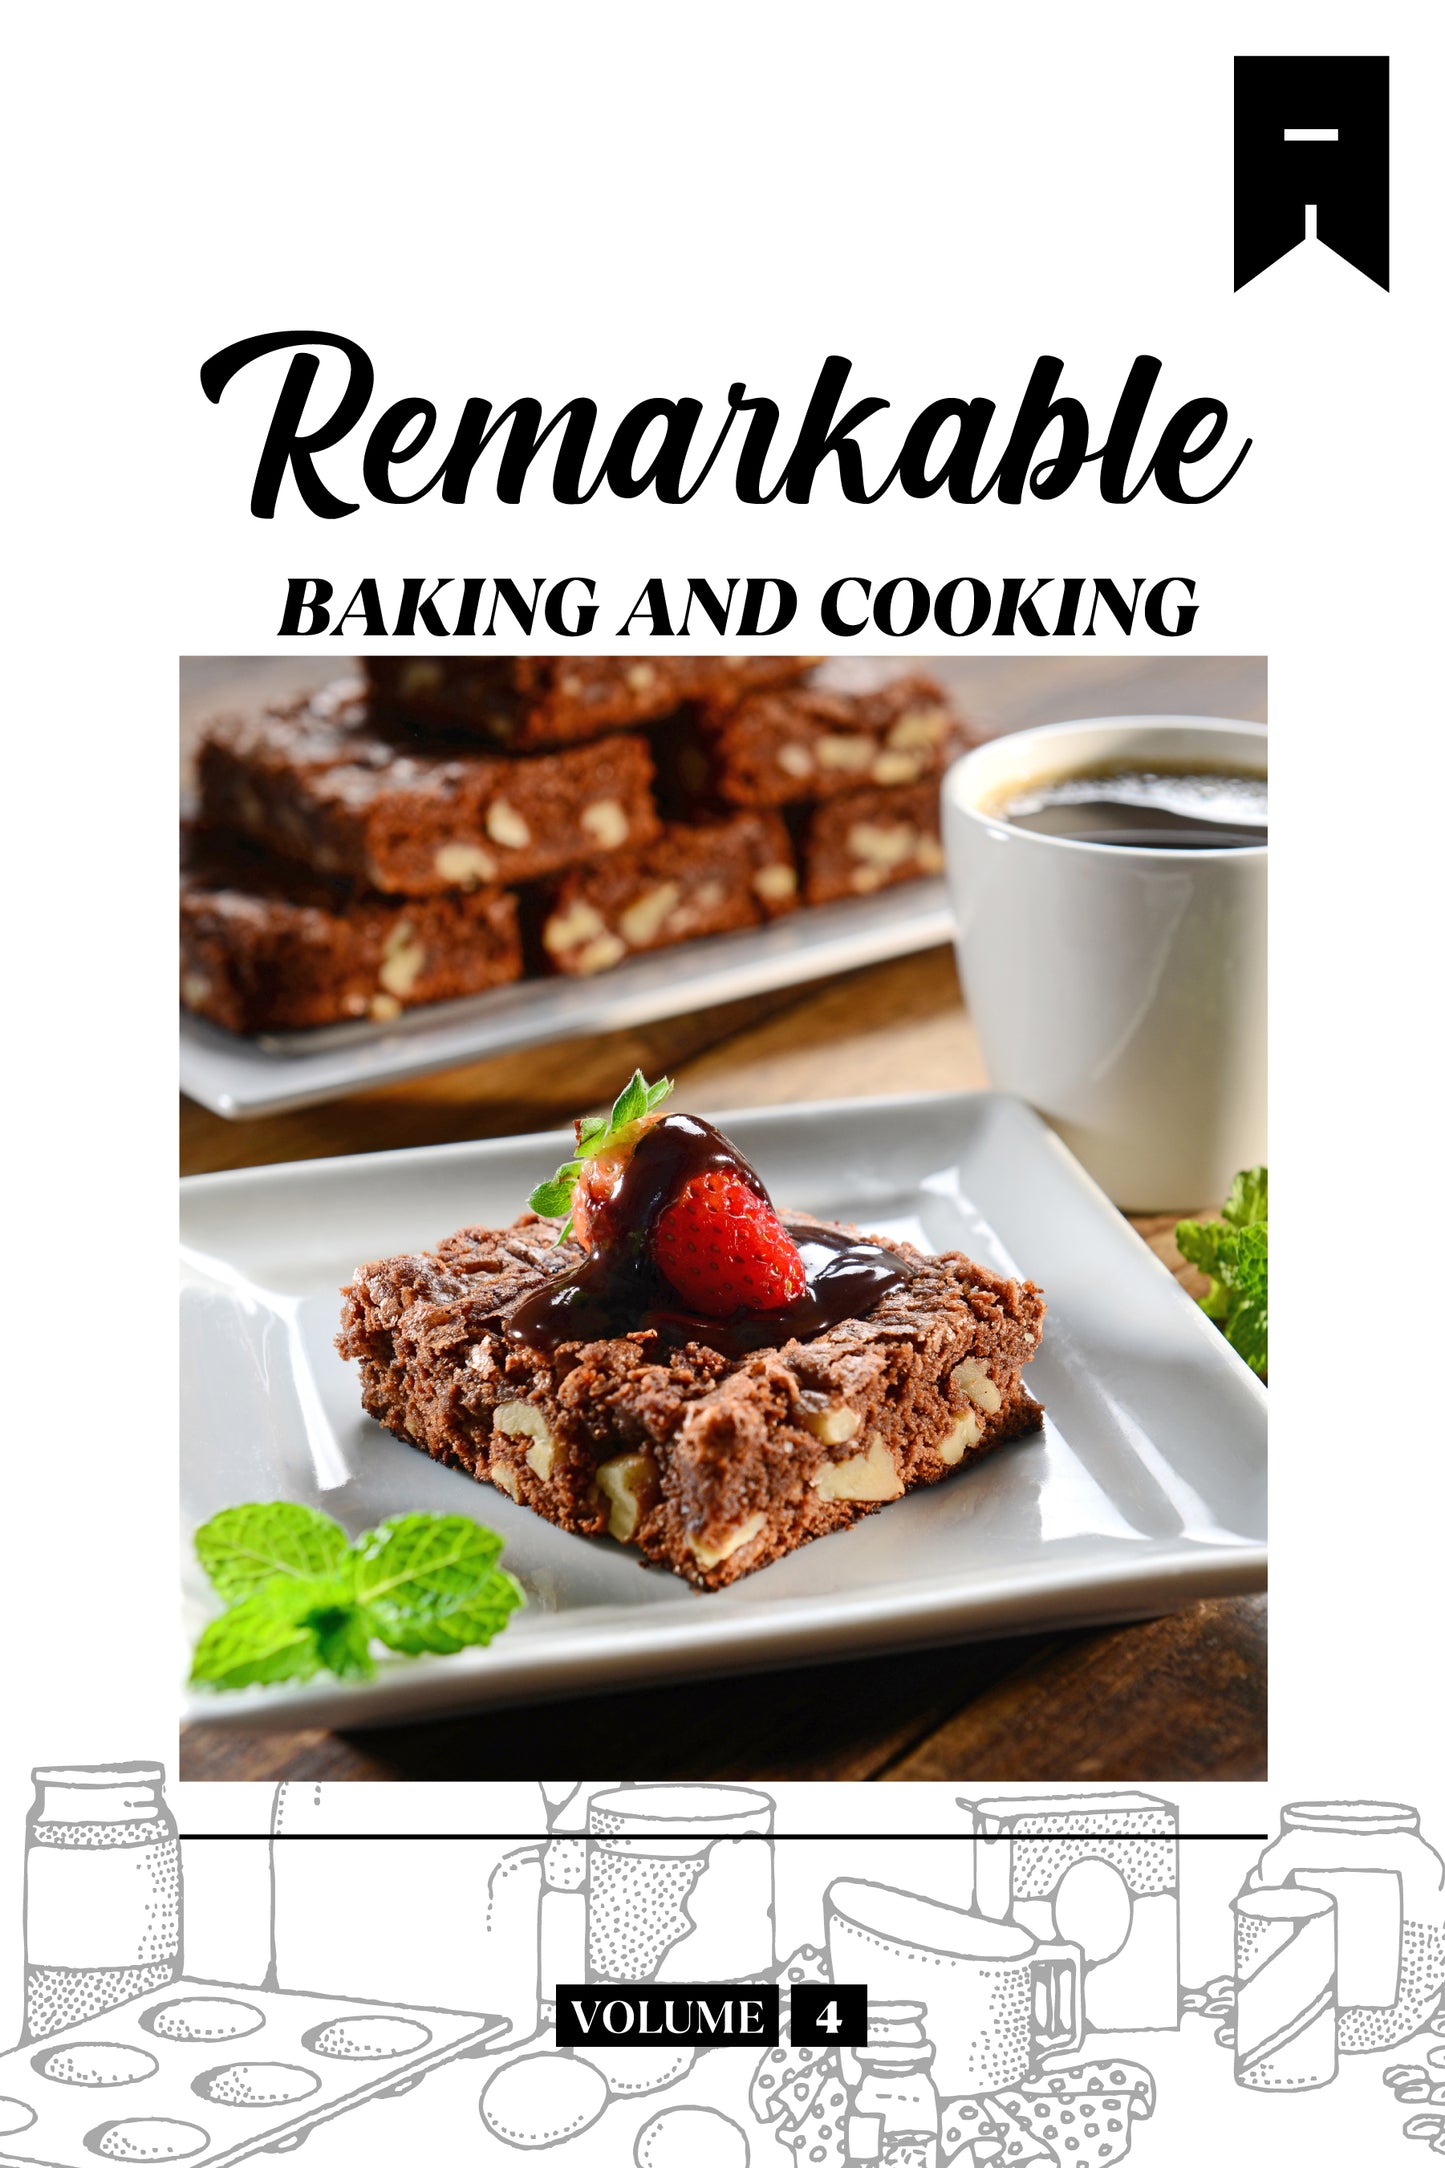 Remarkable Baking (Volume 4) - Physical Book